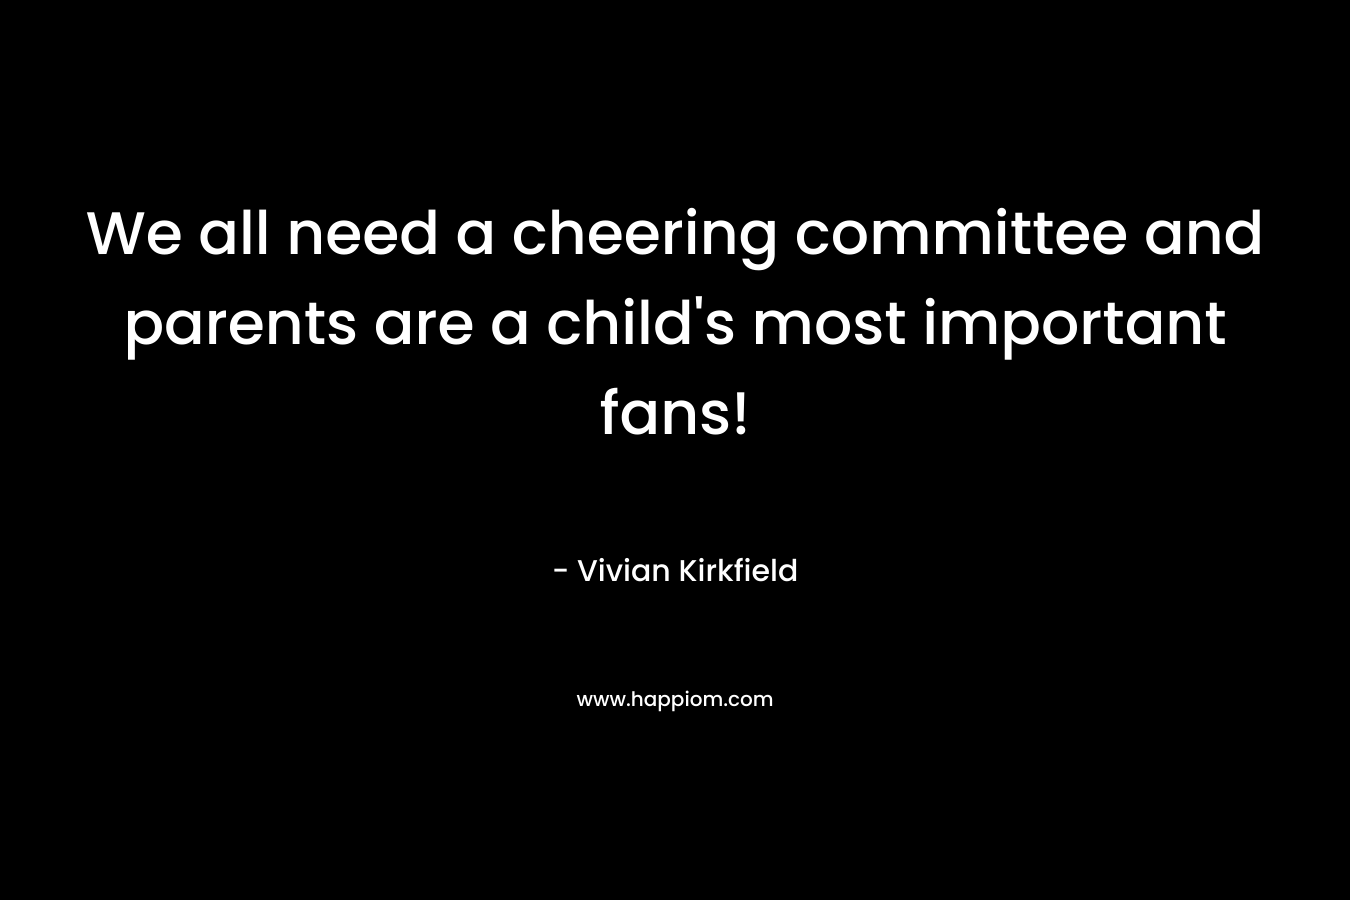 We all need a cheering committee and parents are a child’s most important fans! – Vivian Kirkfield